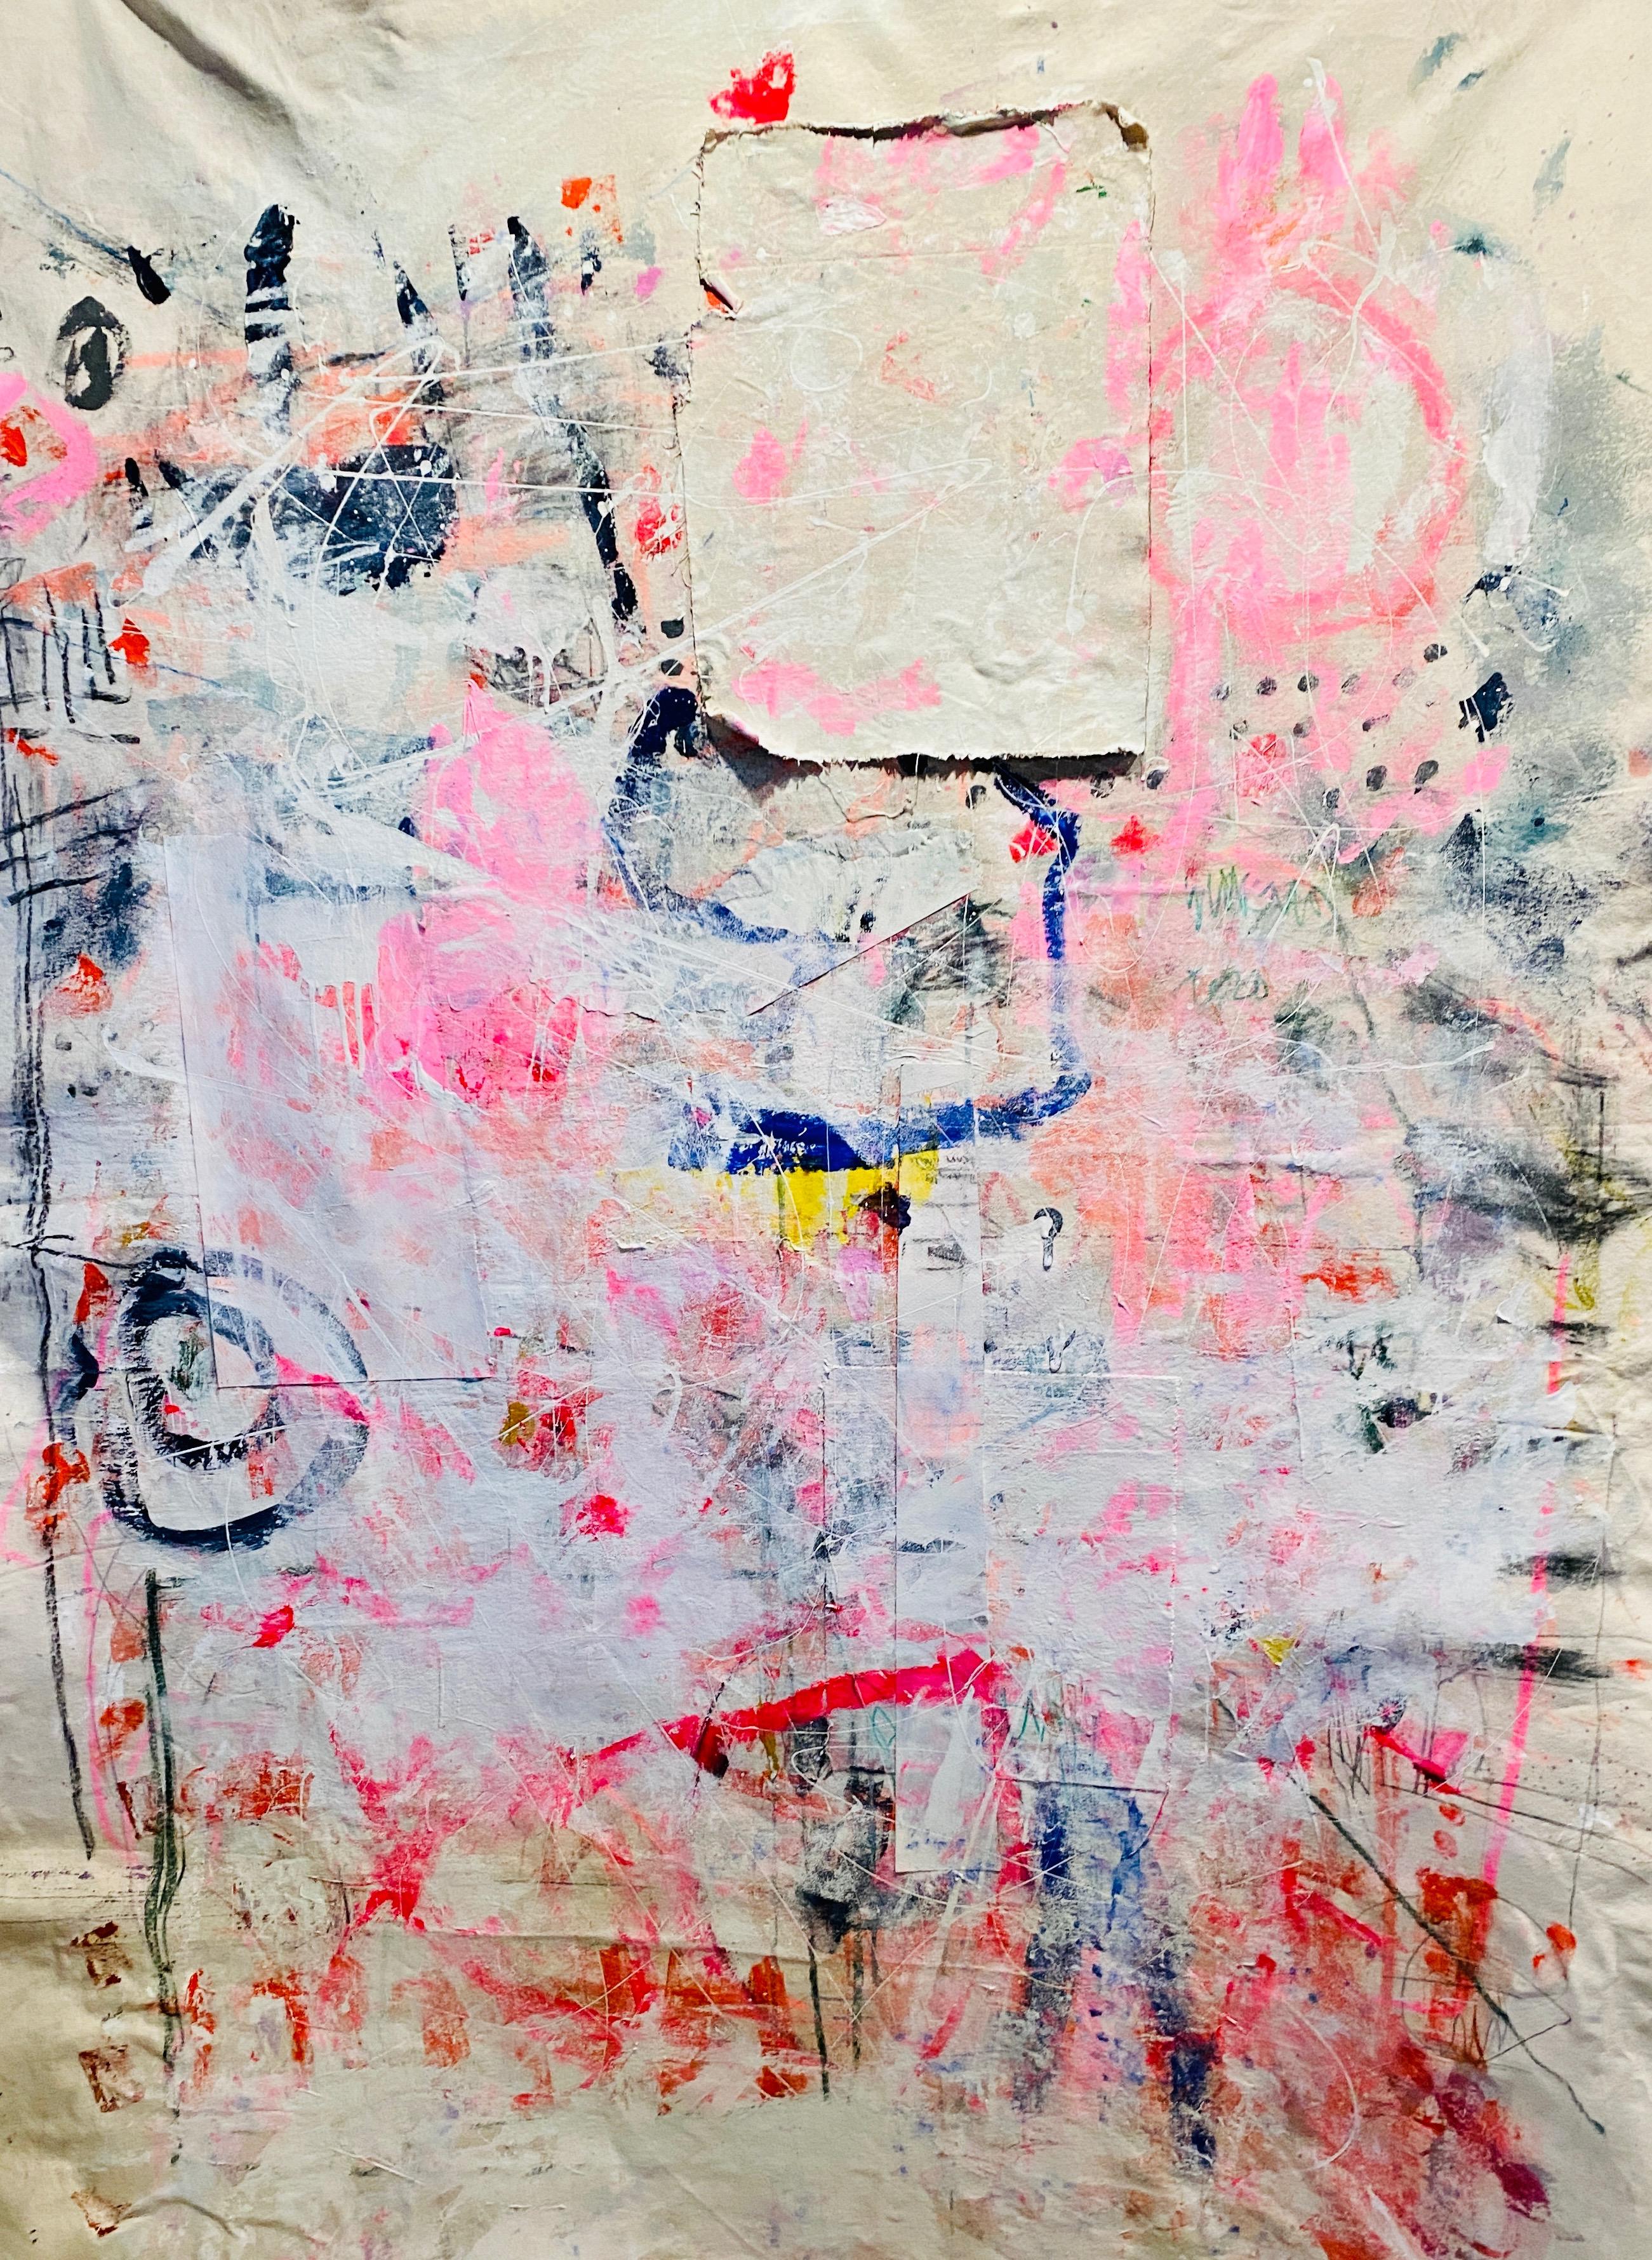 Ashley Chase Andrews Abstract Painting - Pink Graffiti, Abstract Acrylic and Charcoal on Unstretched Canvas, Signed 